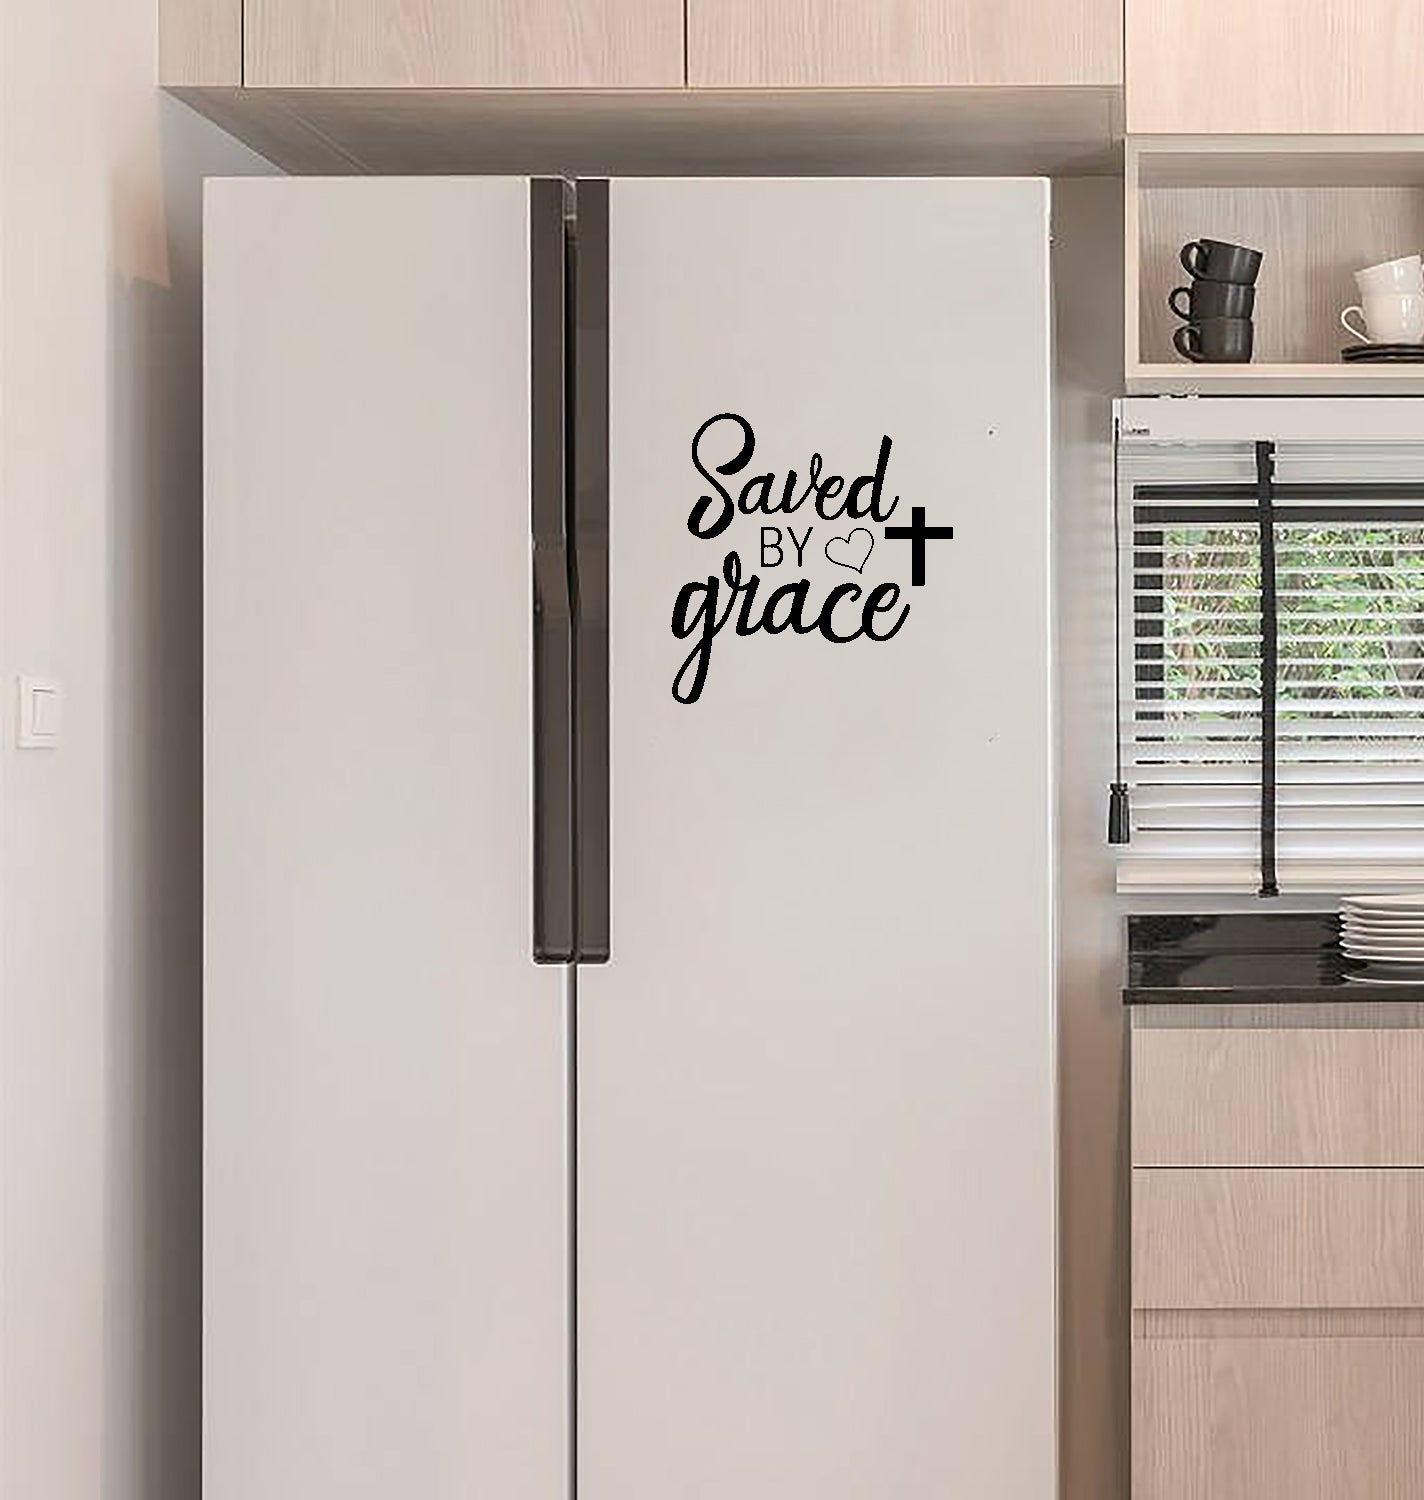 Saved by his Grace Home Decal - Playroom Decals - Home Decals - Home Decor - Wall Decal - Christian Decals